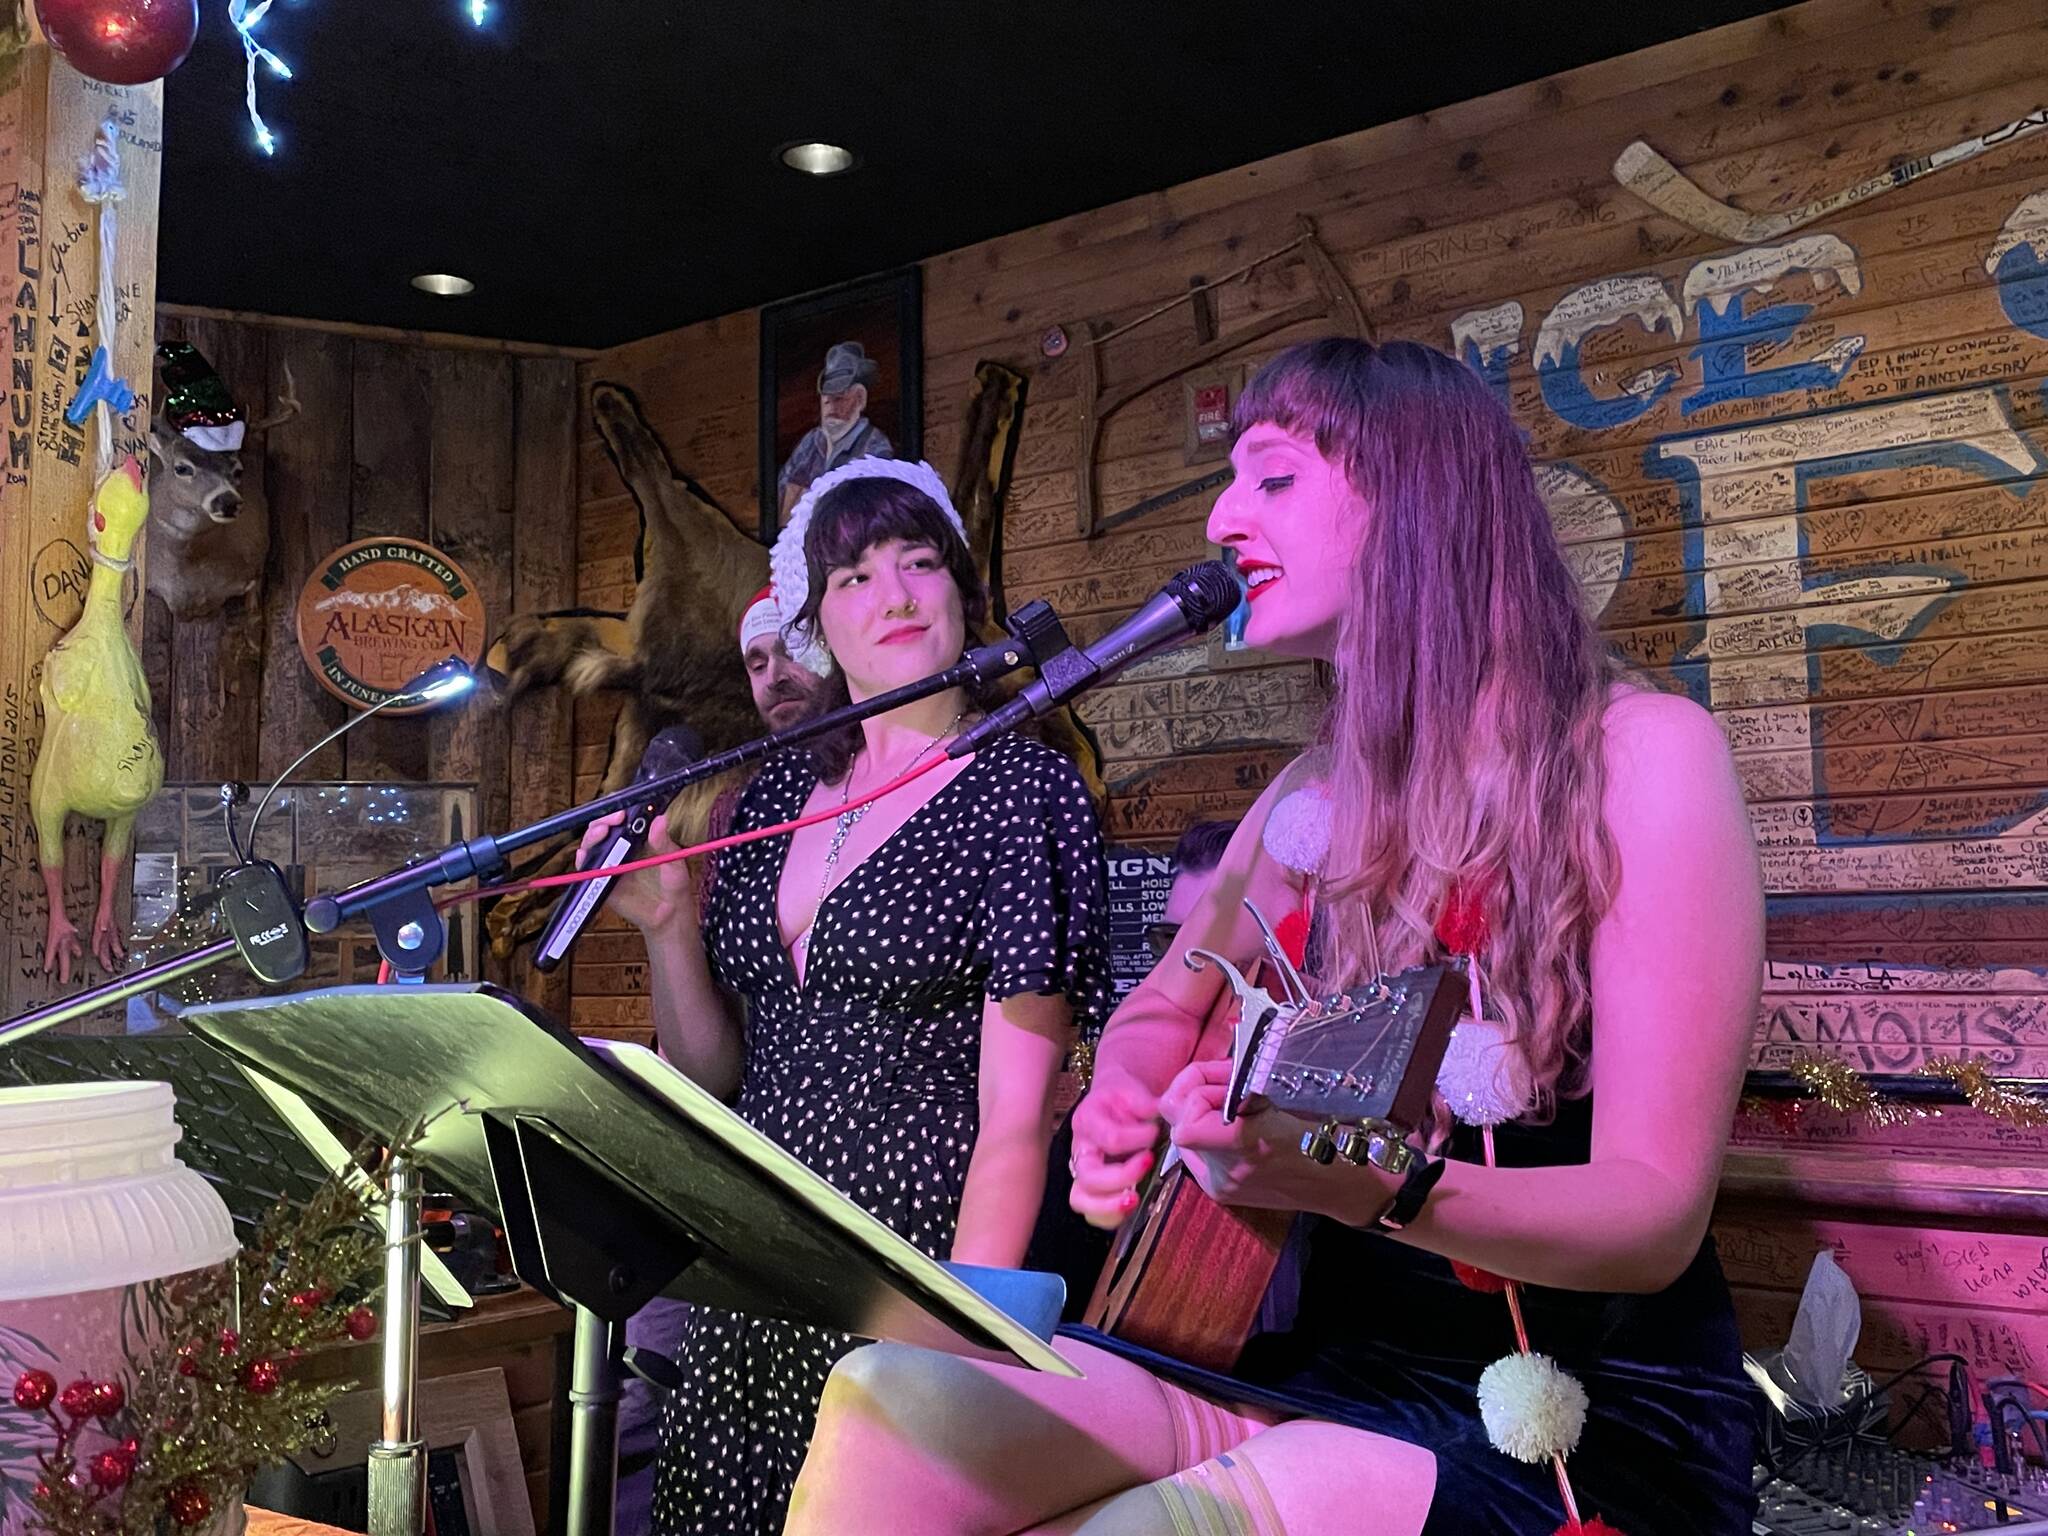 Taylor Vidic and Kelsey Riker sing at the Red Dog Saloon during Gallery Walk on Dec. 3, 2021. (Michael S. Lockett / Juneau Empire)